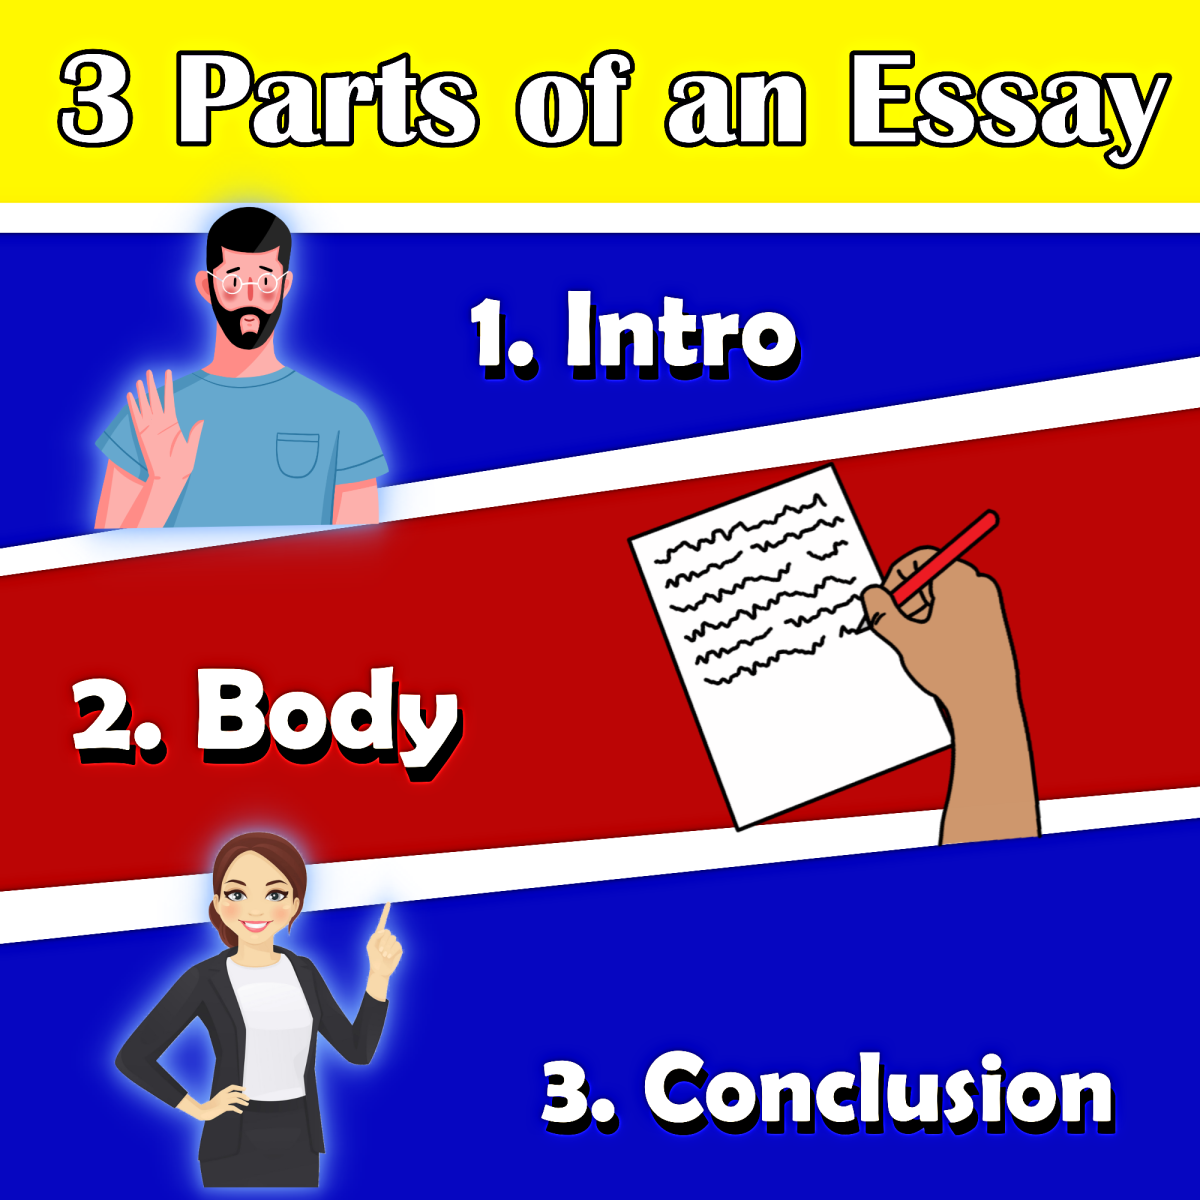 The three parts of an essay: Intro, Body and Conclusion.